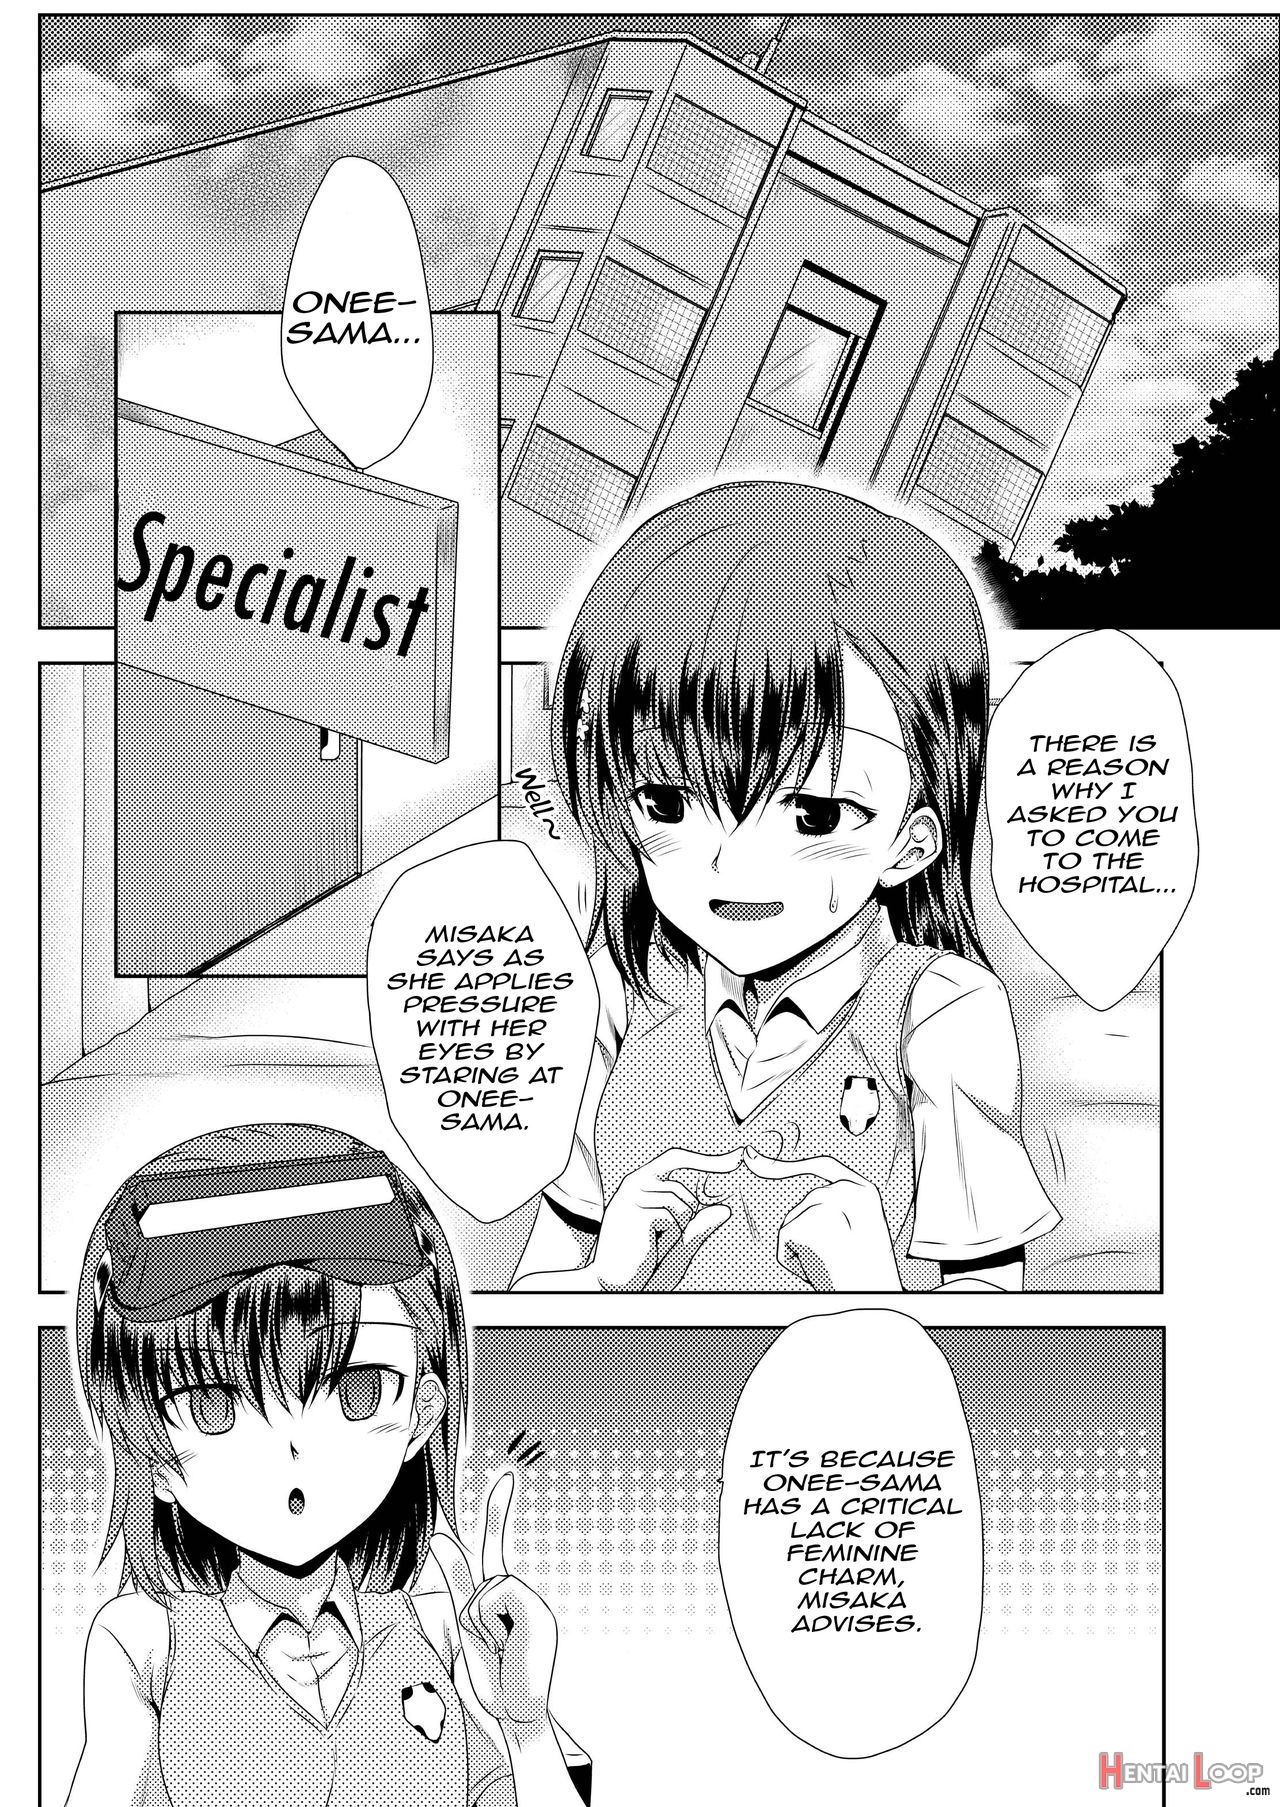 Misaka X3 - To Your Honest Feelings. page 6